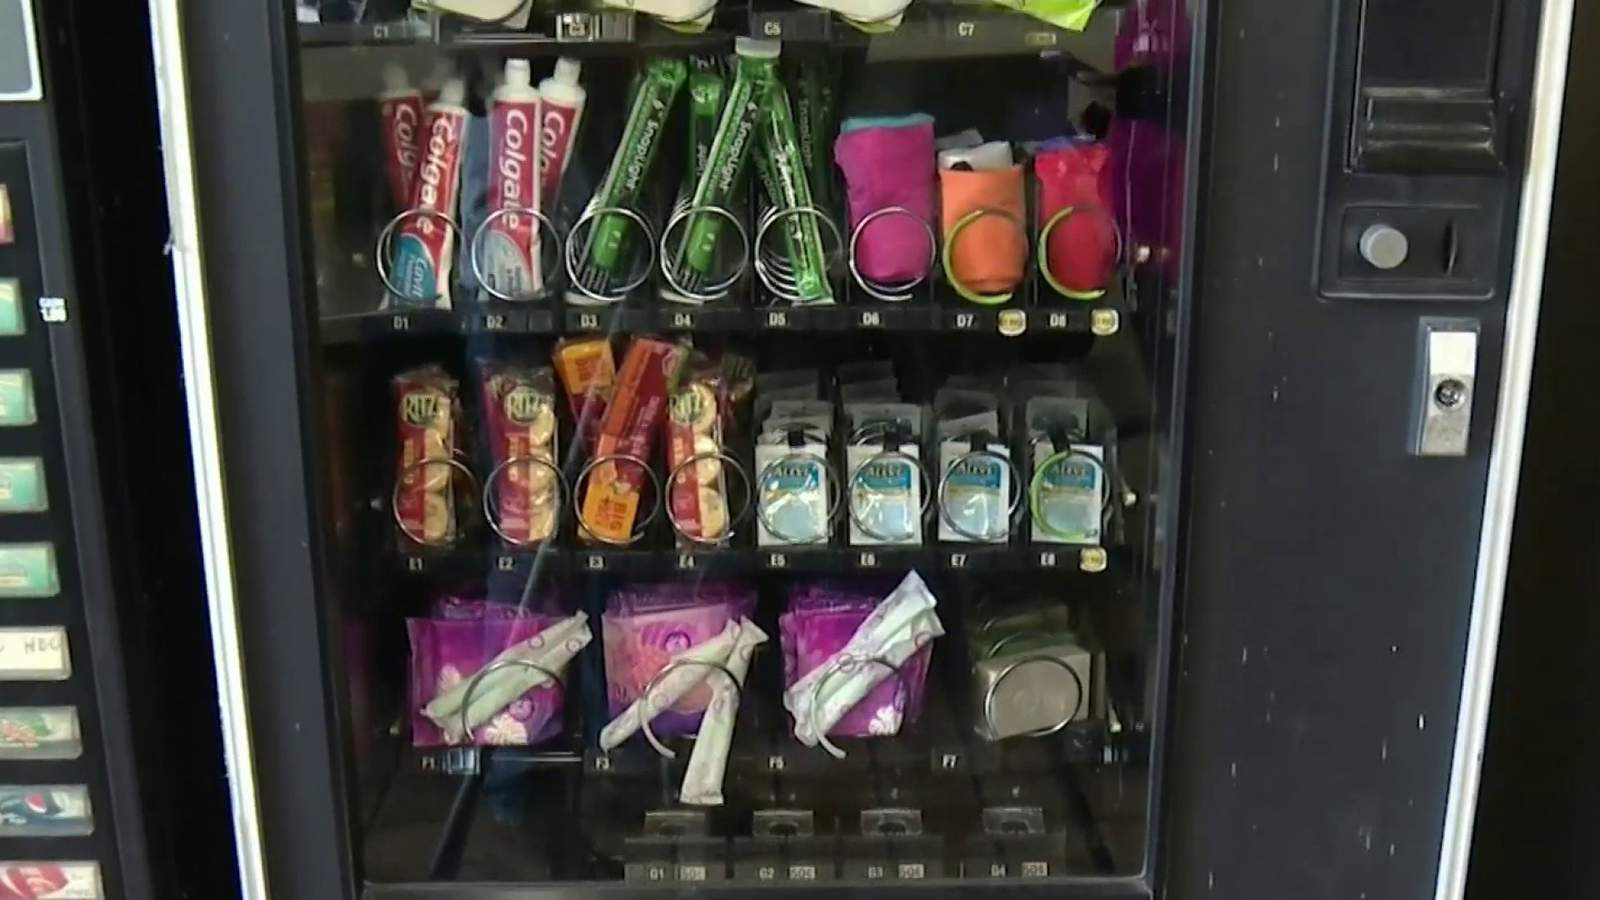 Hygiene vending machine provides free essentials for homeless in Parramore